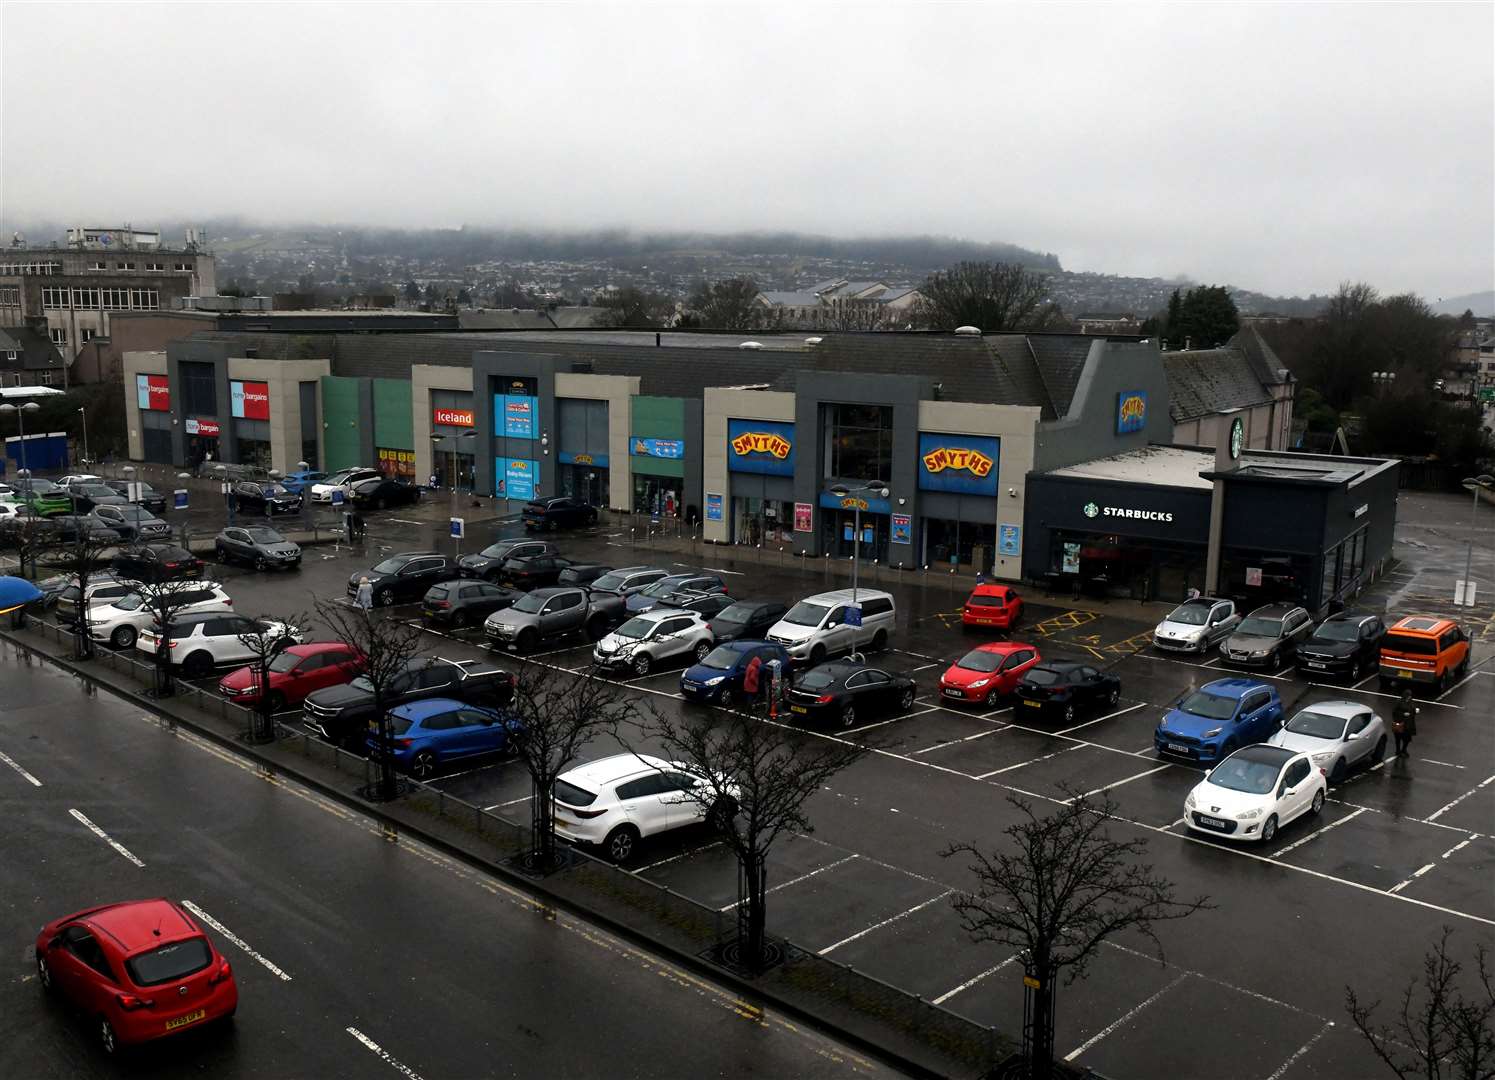 Rose Street Retail Park car park has been causing a headache for many local drivers. Picture: James Mackenzie.